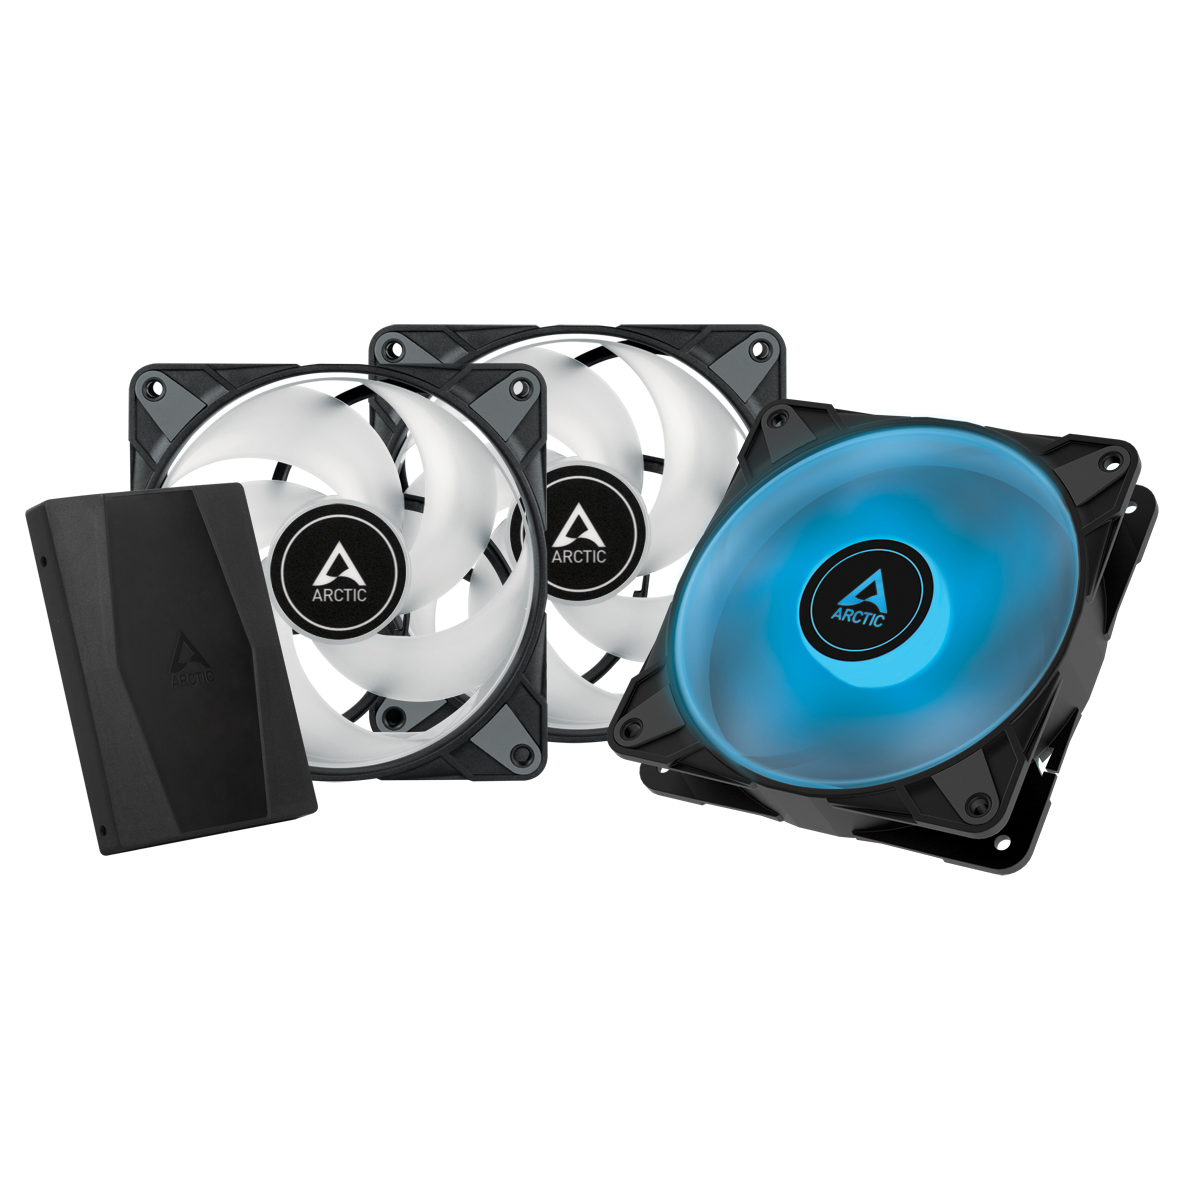 Arctic P12 PWM PST RGB 0dB – 120mm Pressure optimized case fan | PWM controlled speed with PST | RGB - Arctic 2.35.64.00.079